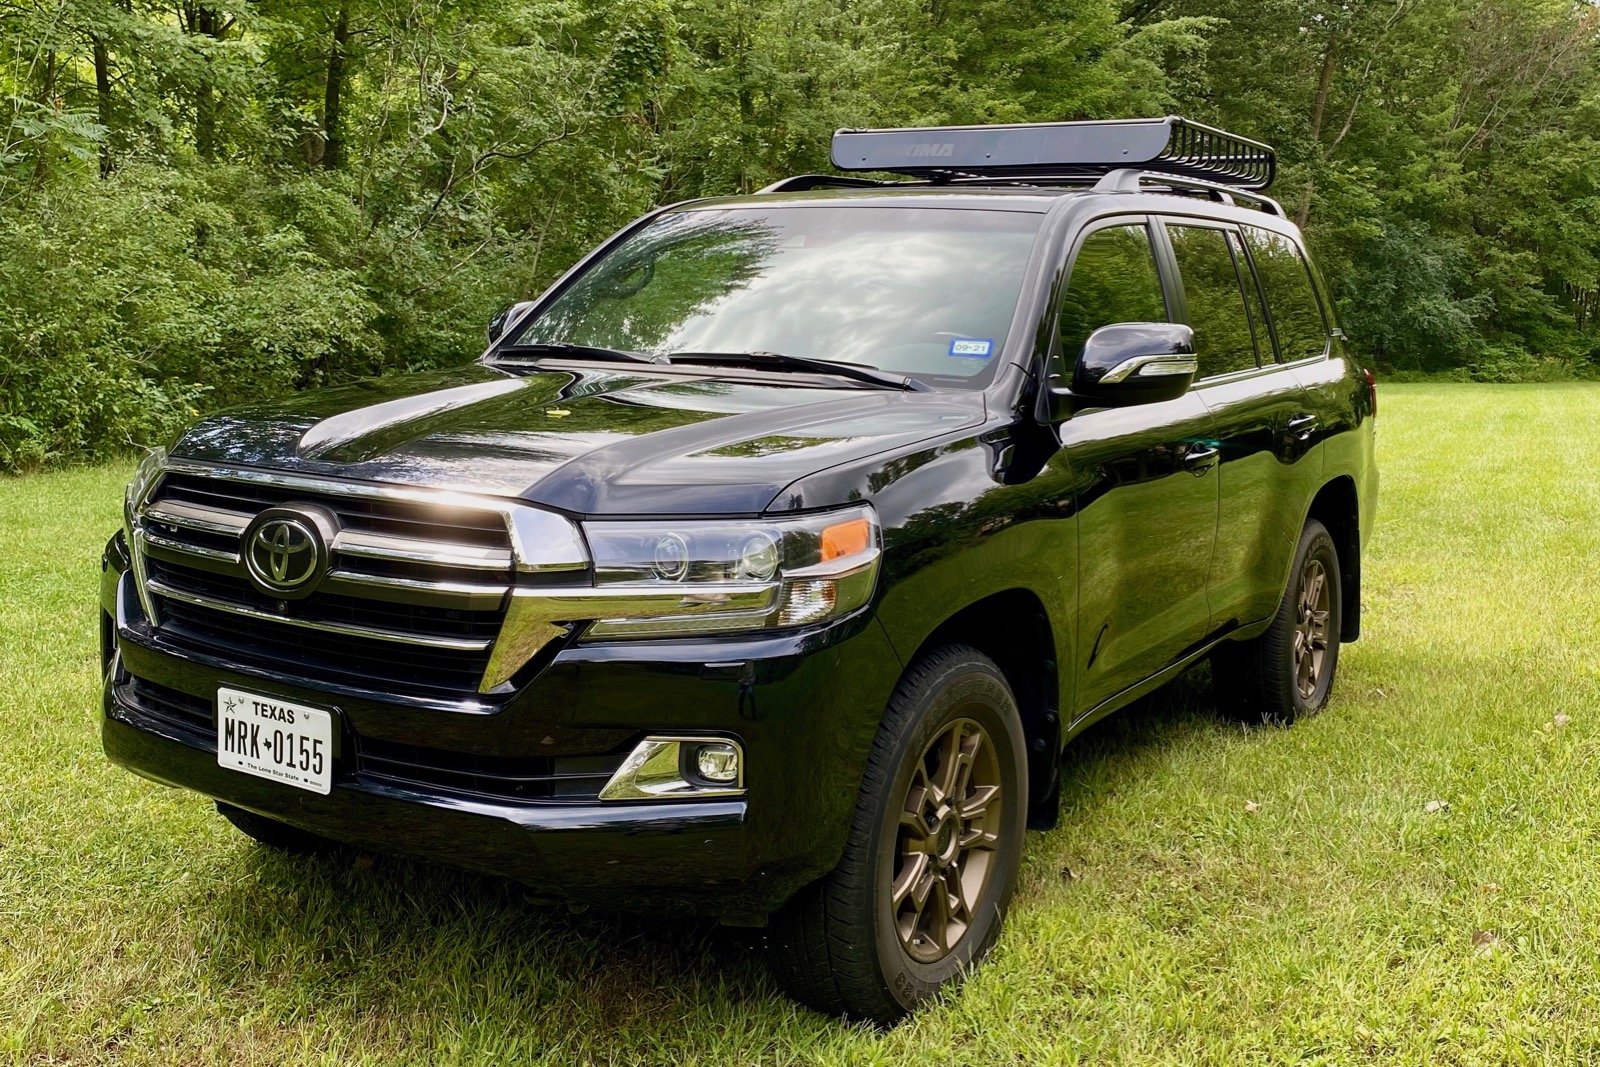 2020 Toyota Land Cruiser: Prices, Reviews & Pictures - CarGurus